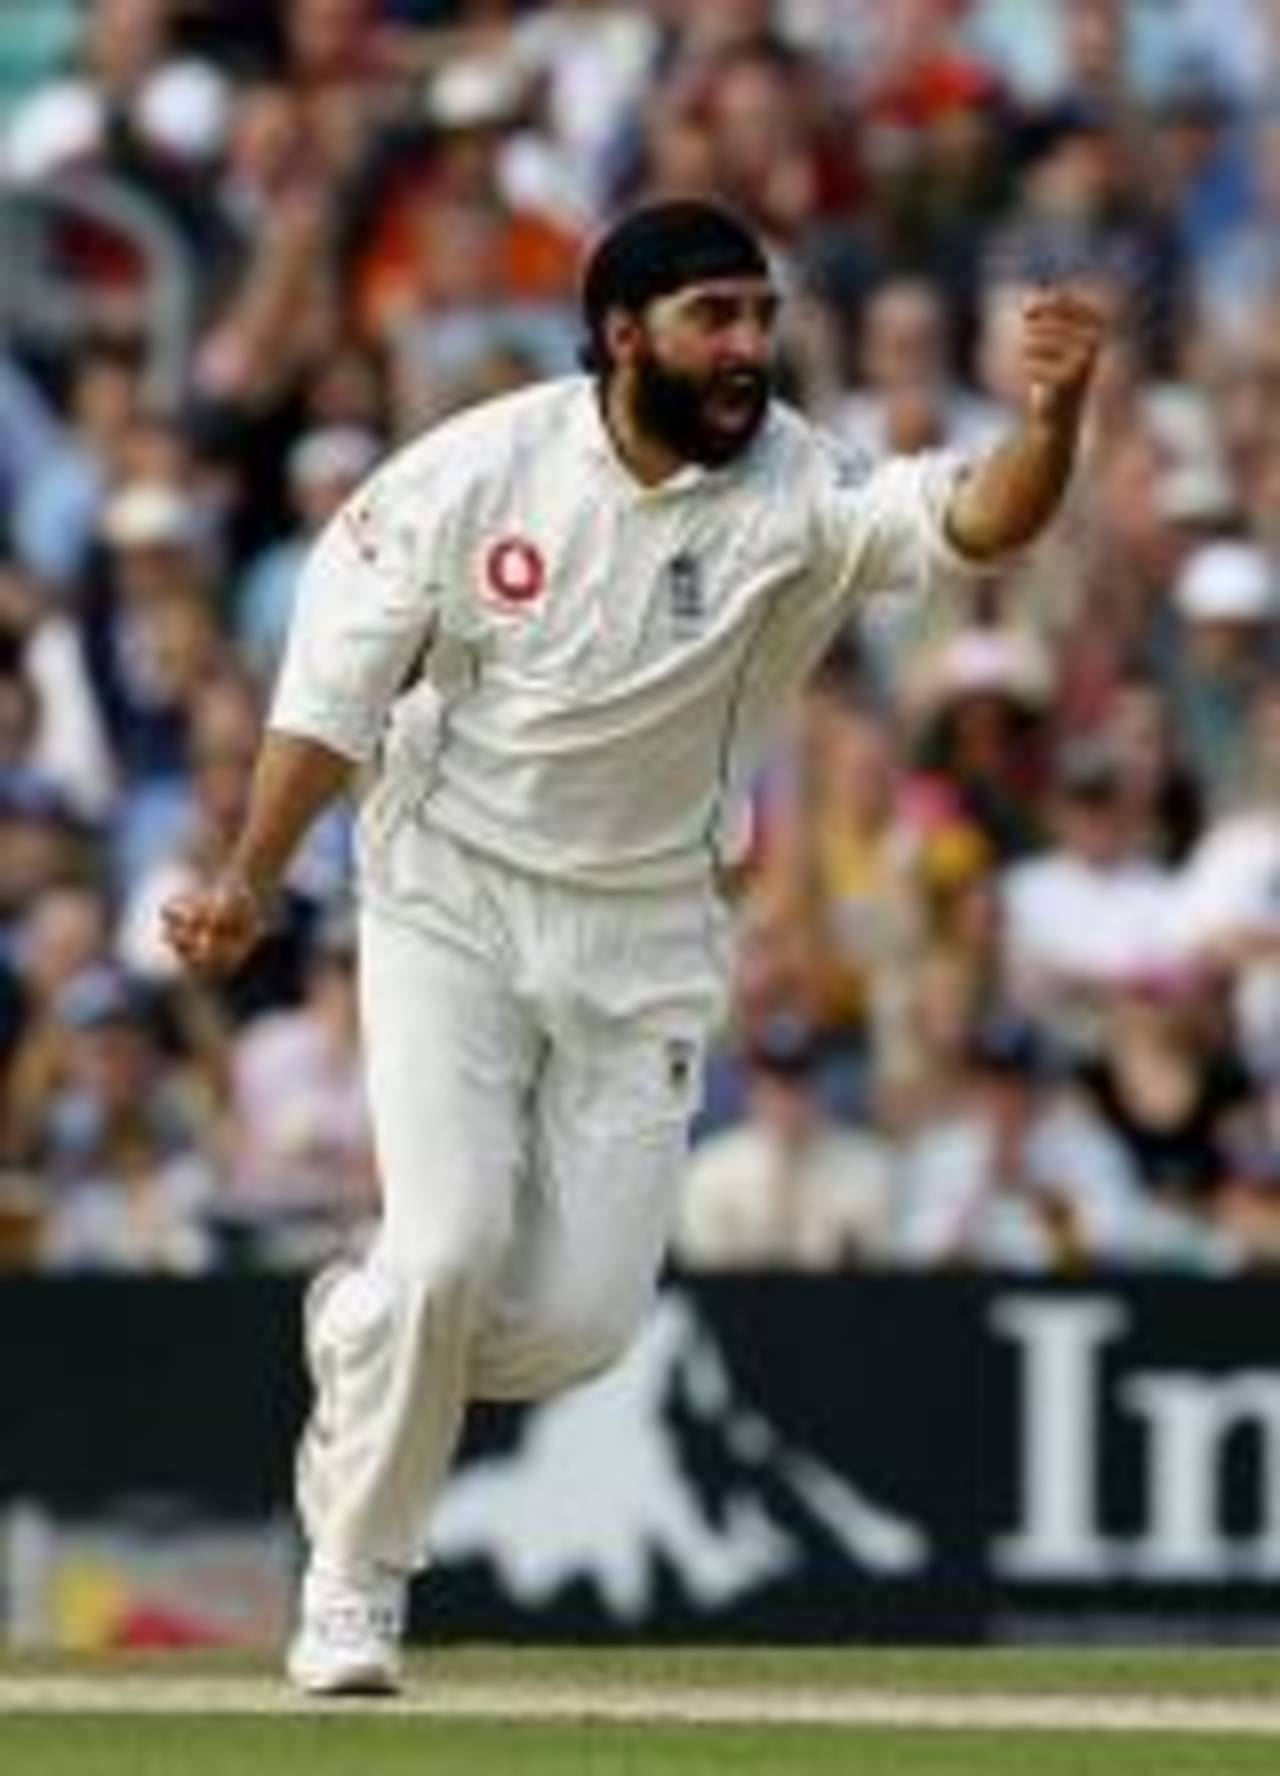 Monty Panesar celebrates his only wicket, trapping Umar Gul lbw, England v Pakistan, 4th Test, The Oval, August 19, 2006